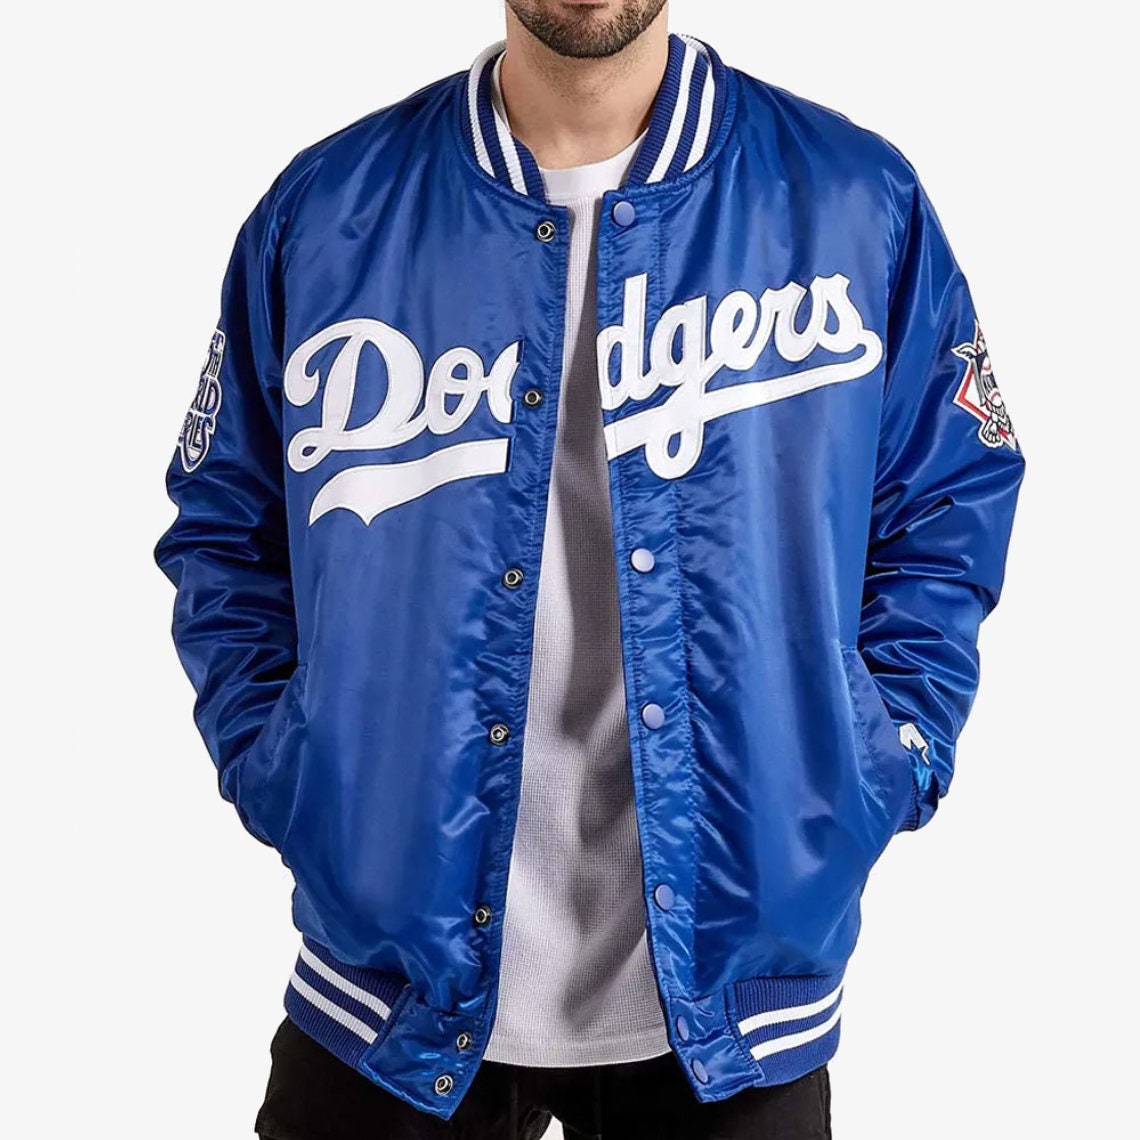 MLB: Project 32 - New Dugout Jackets Added - Page 13 - Concepts